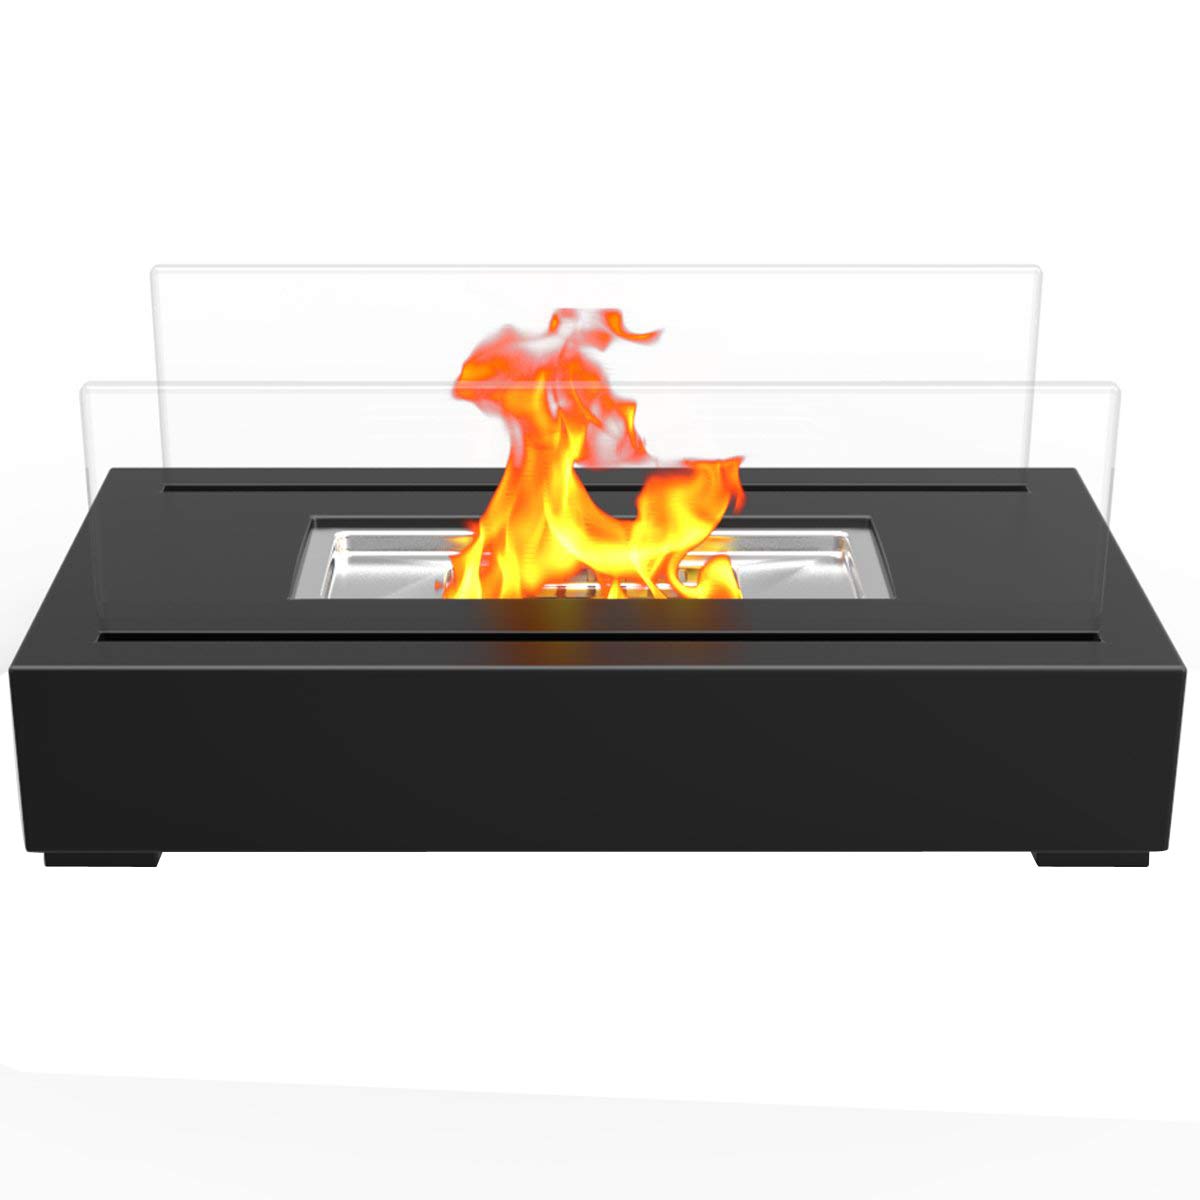 Ventless Gel Fireplace Lovely Amazon Regal Flame Utopia Ventless Tabletop Portable